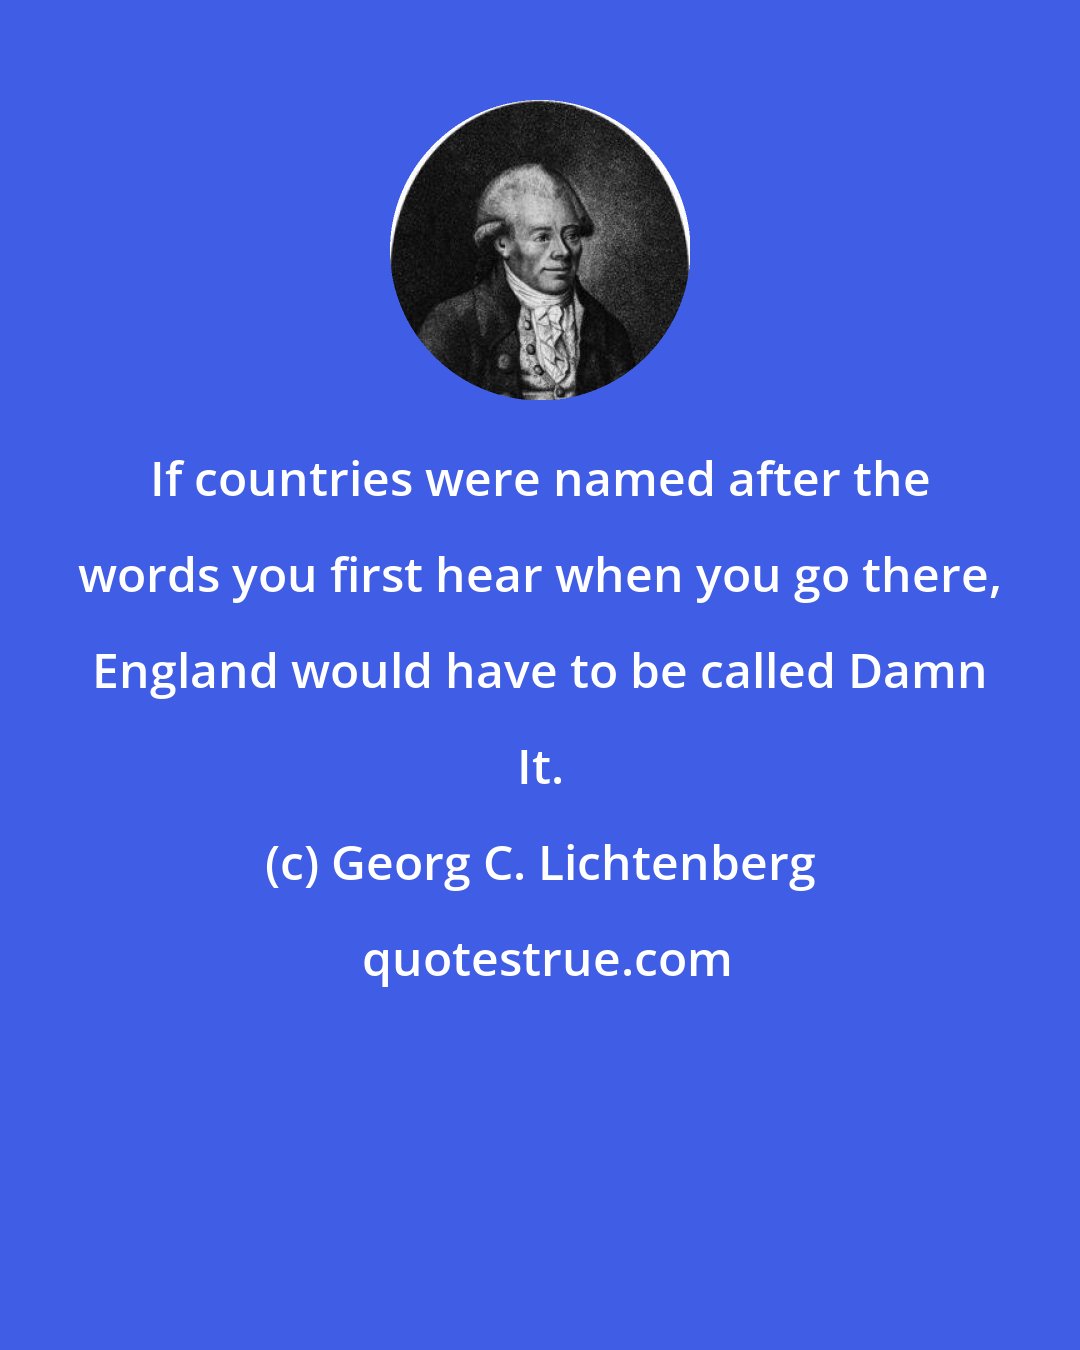 Georg C. Lichtenberg: If countries were named after the words you first hear when you go there, England would have to be called Damn It.